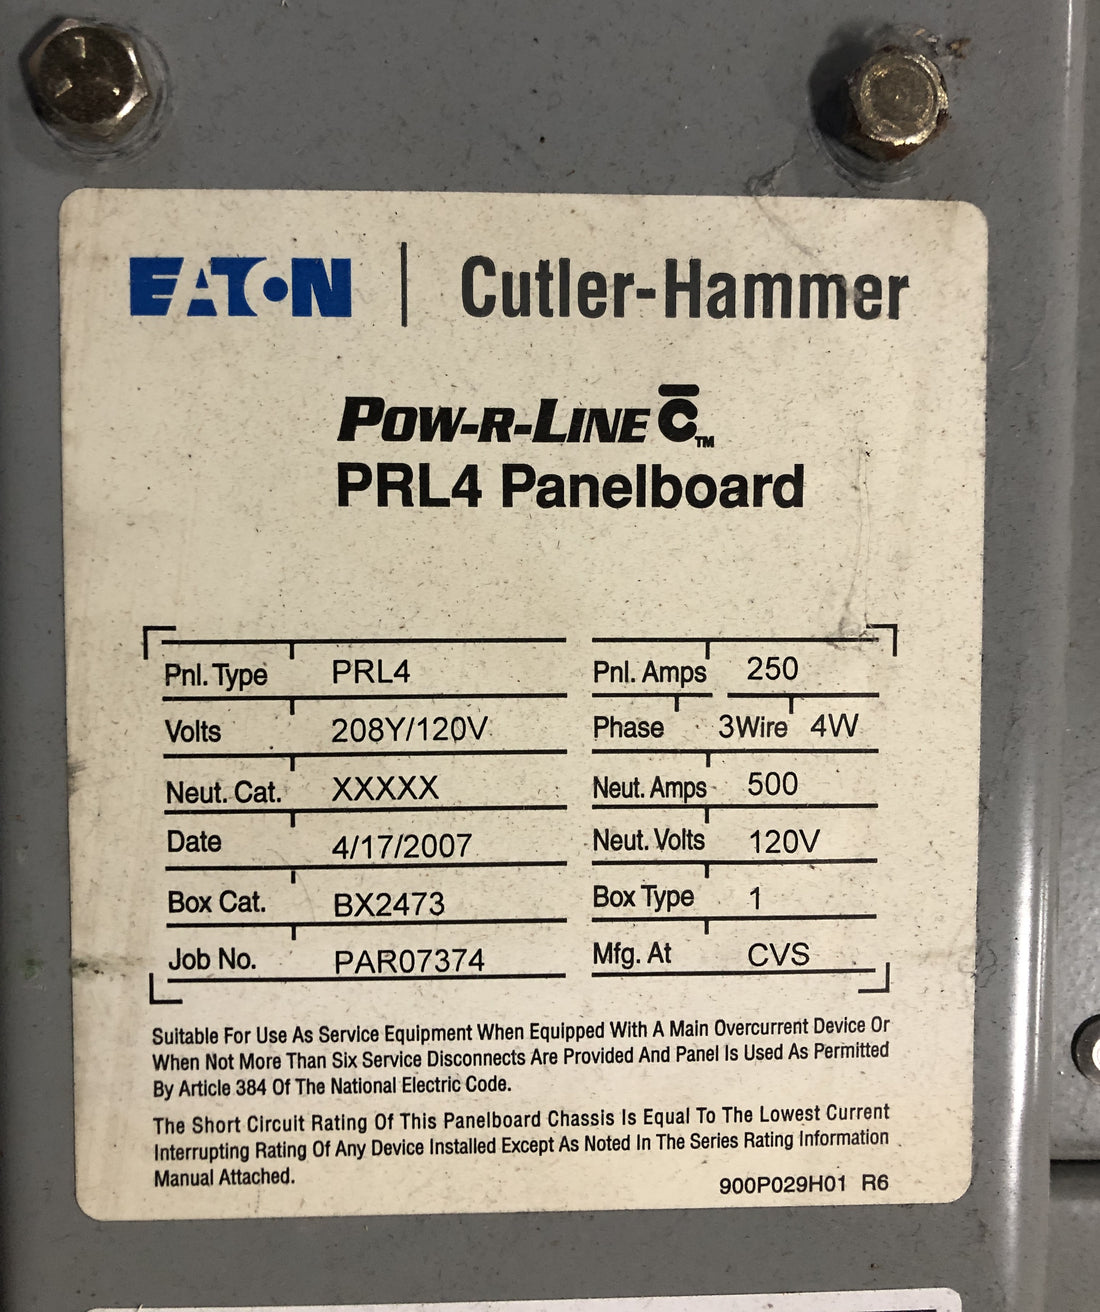 Eaton Pow-R-Line Panelboard 250A 208Y/120V 3 phase 4W Bypass Switch (PRL4)